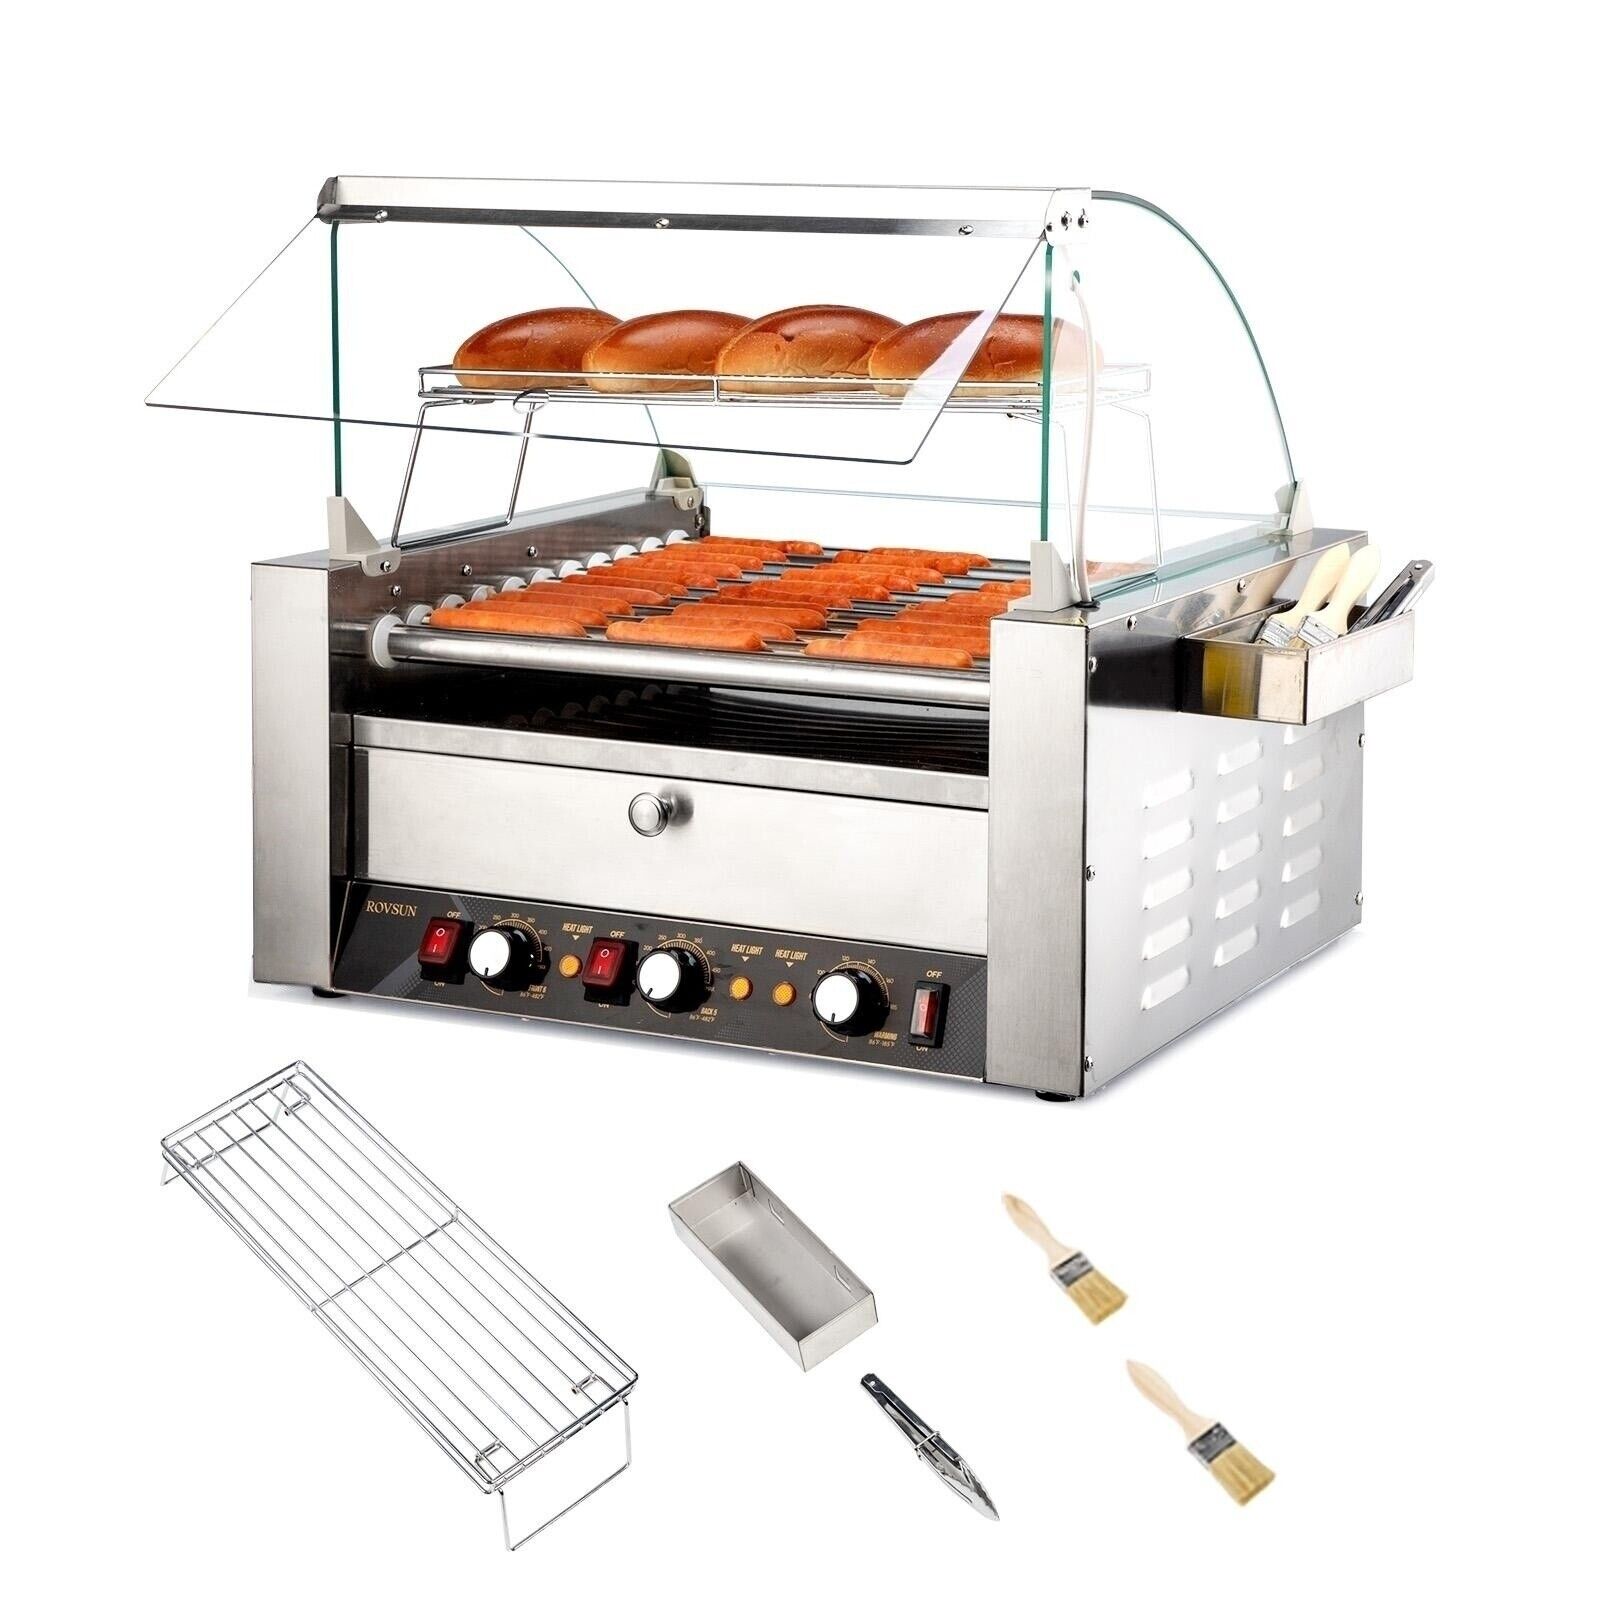 30 Hot Dog 11 Roller Bun Warmer Grill Cooker Machine Electric w/Cover 2000W